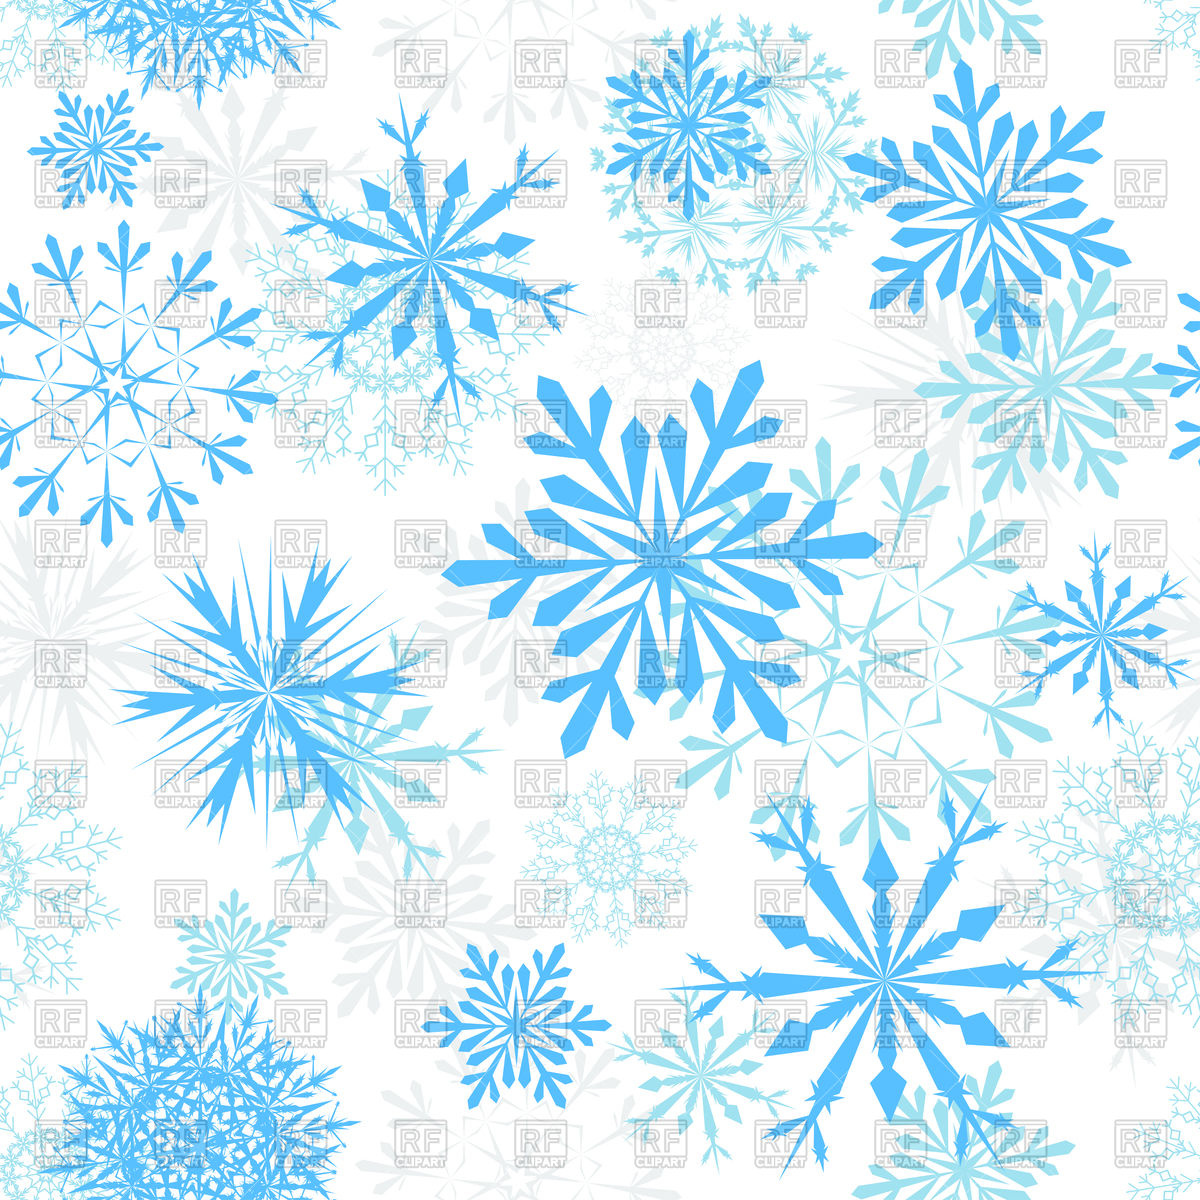 38+ Blue snowflake page background clipart